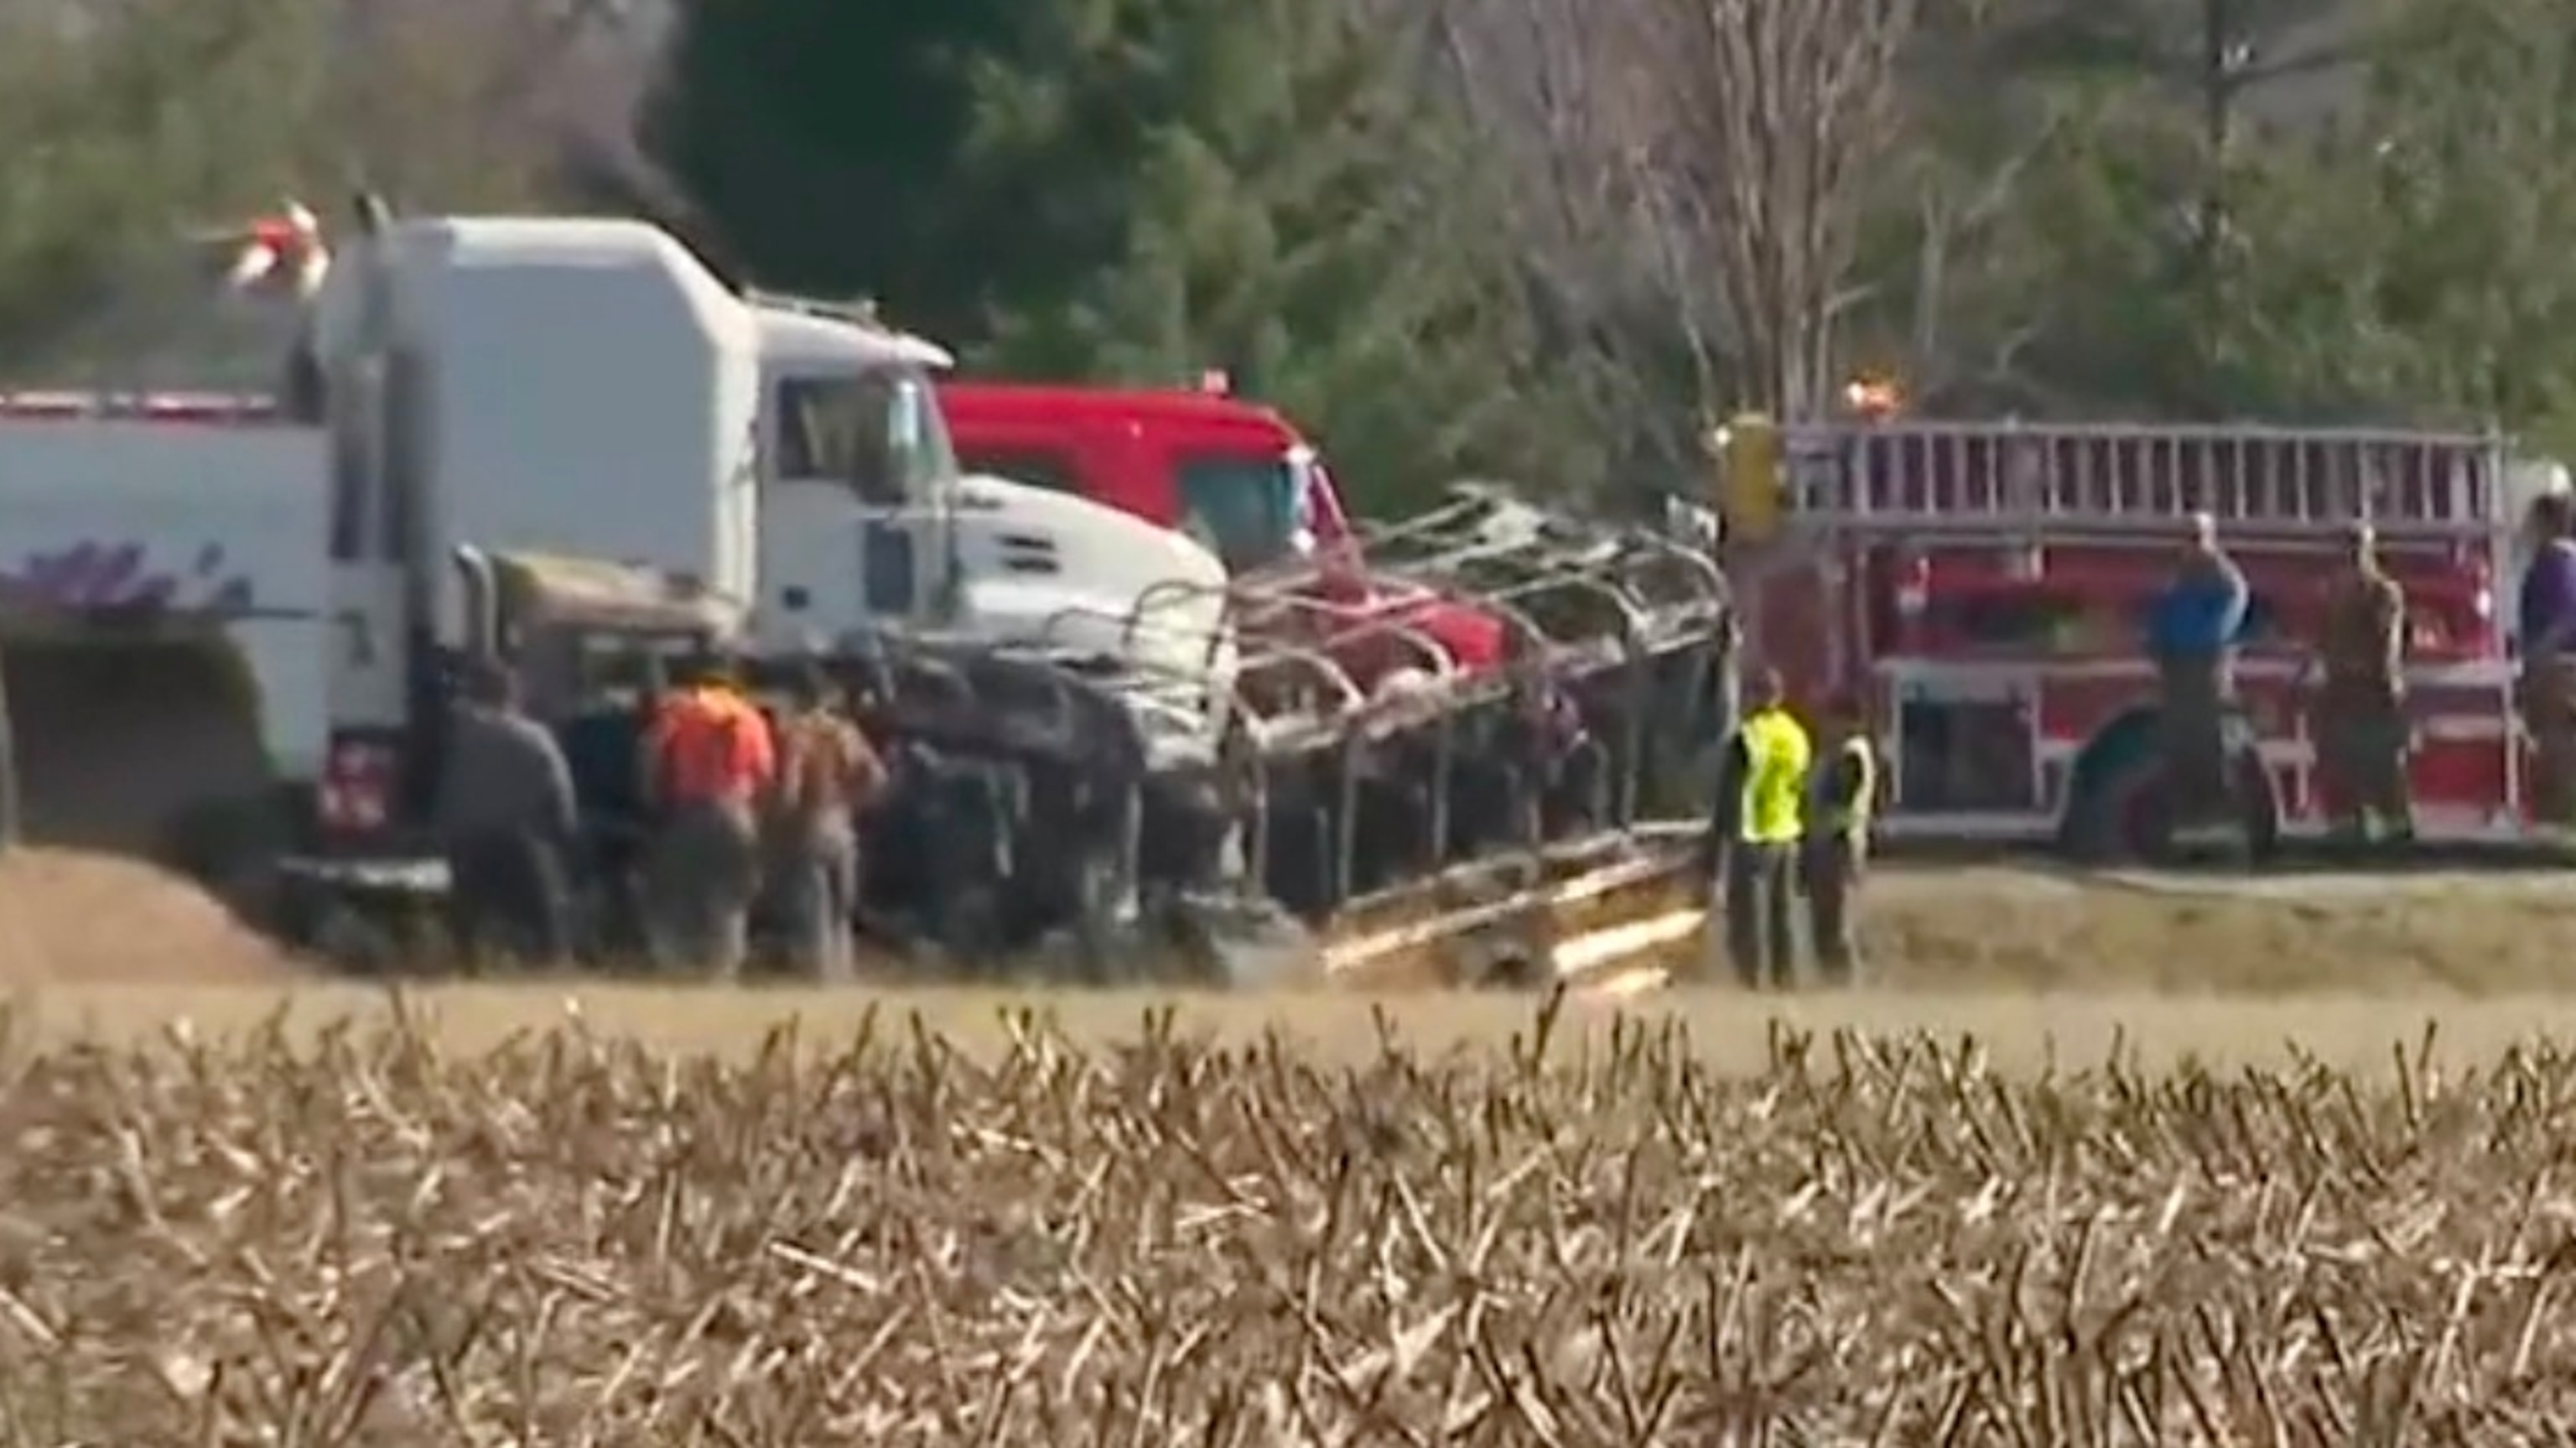 PHOTO: Two adults and three children were killed after a school bus crashed into commercial vehicle, March 11, 2024, Rushville, Ill. 